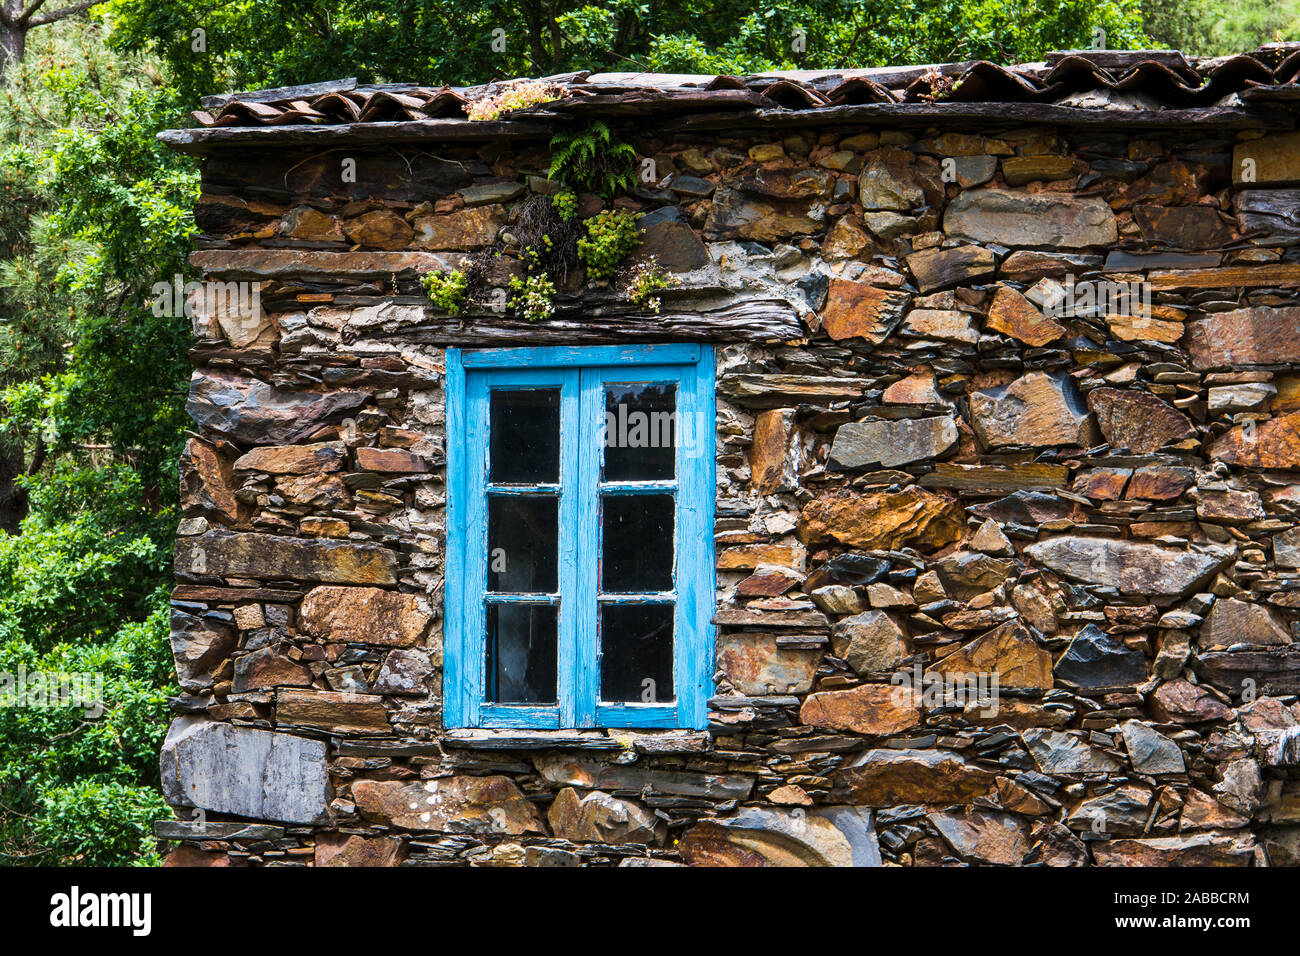 Close up of a window with blue trim and a rustic stone wall in the village of Cerdeira, Portugal Stock Photo